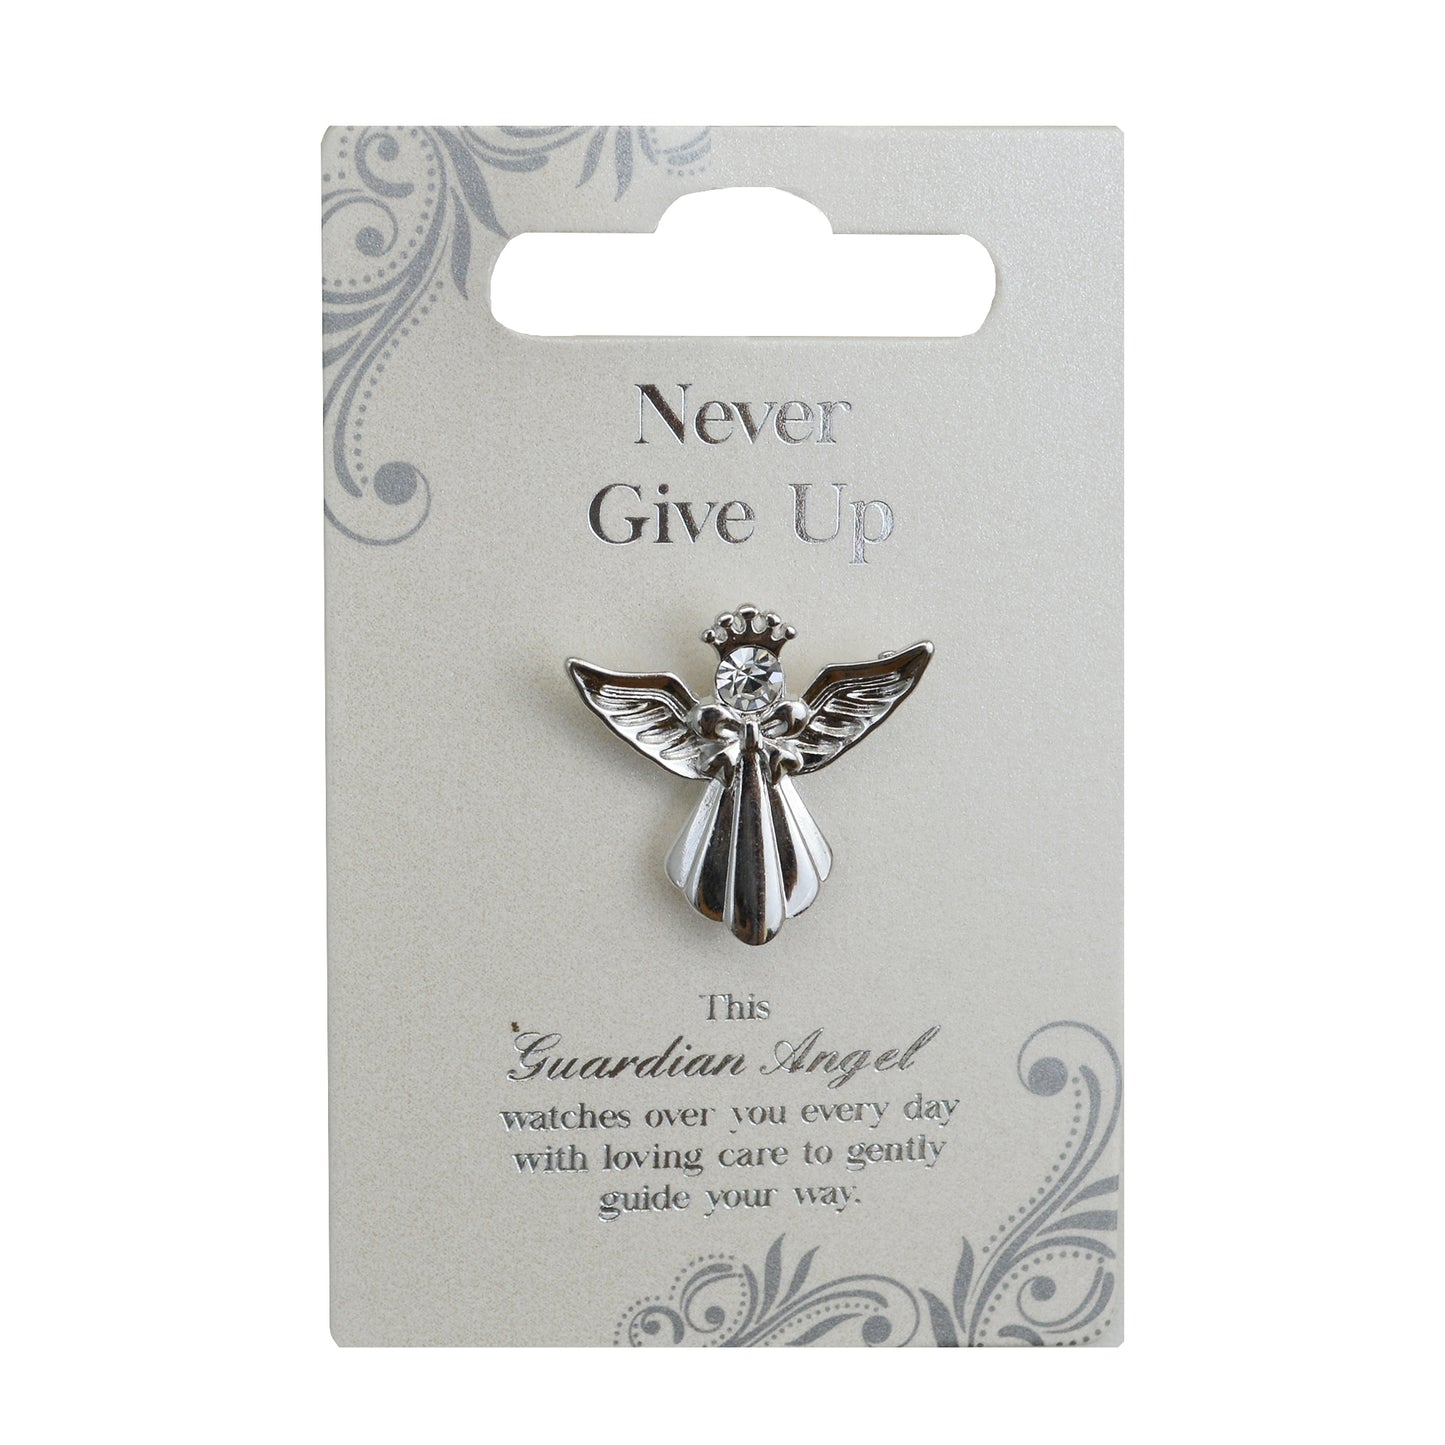 Never Give Up Silver Coloured Angel Pin With Gem Stone